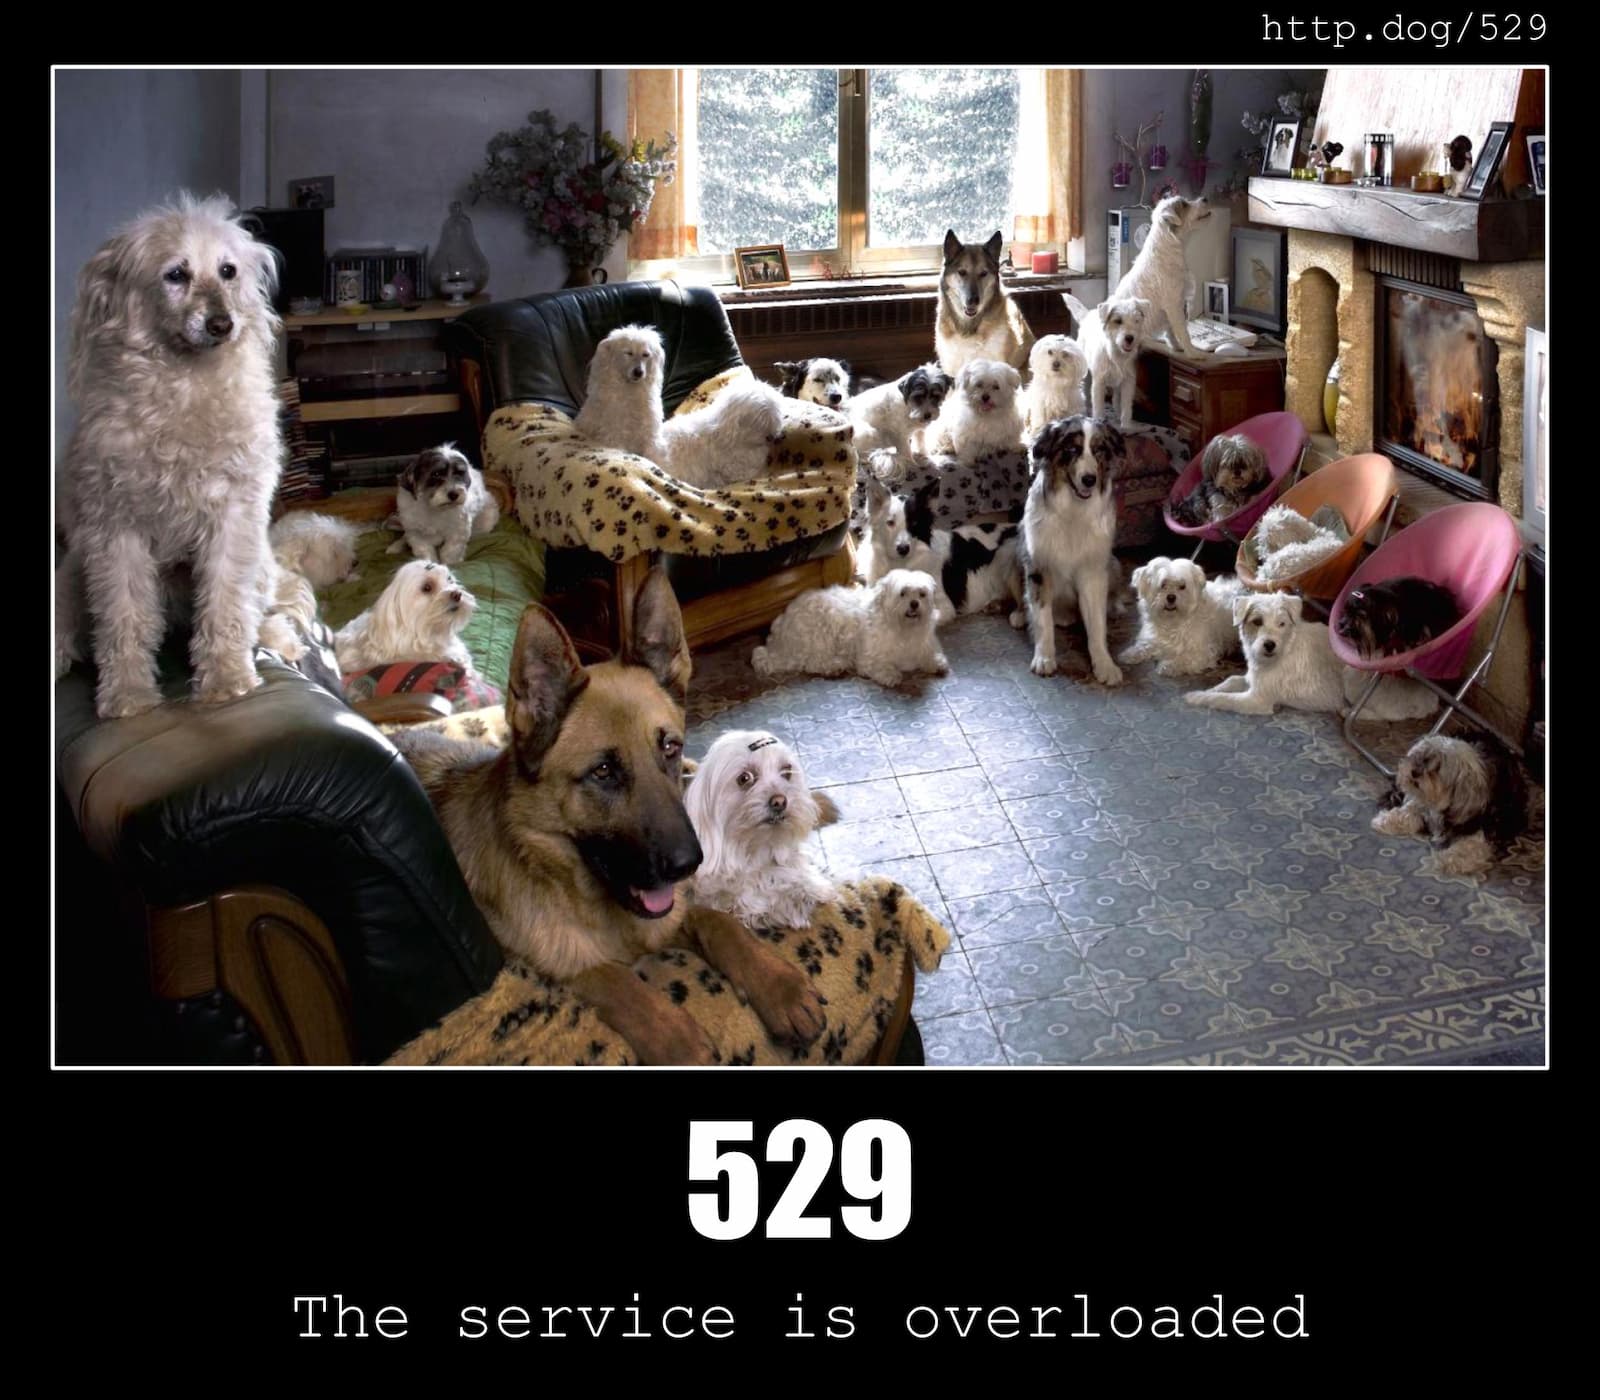 HTTP Status Code 529 The service is overloaded